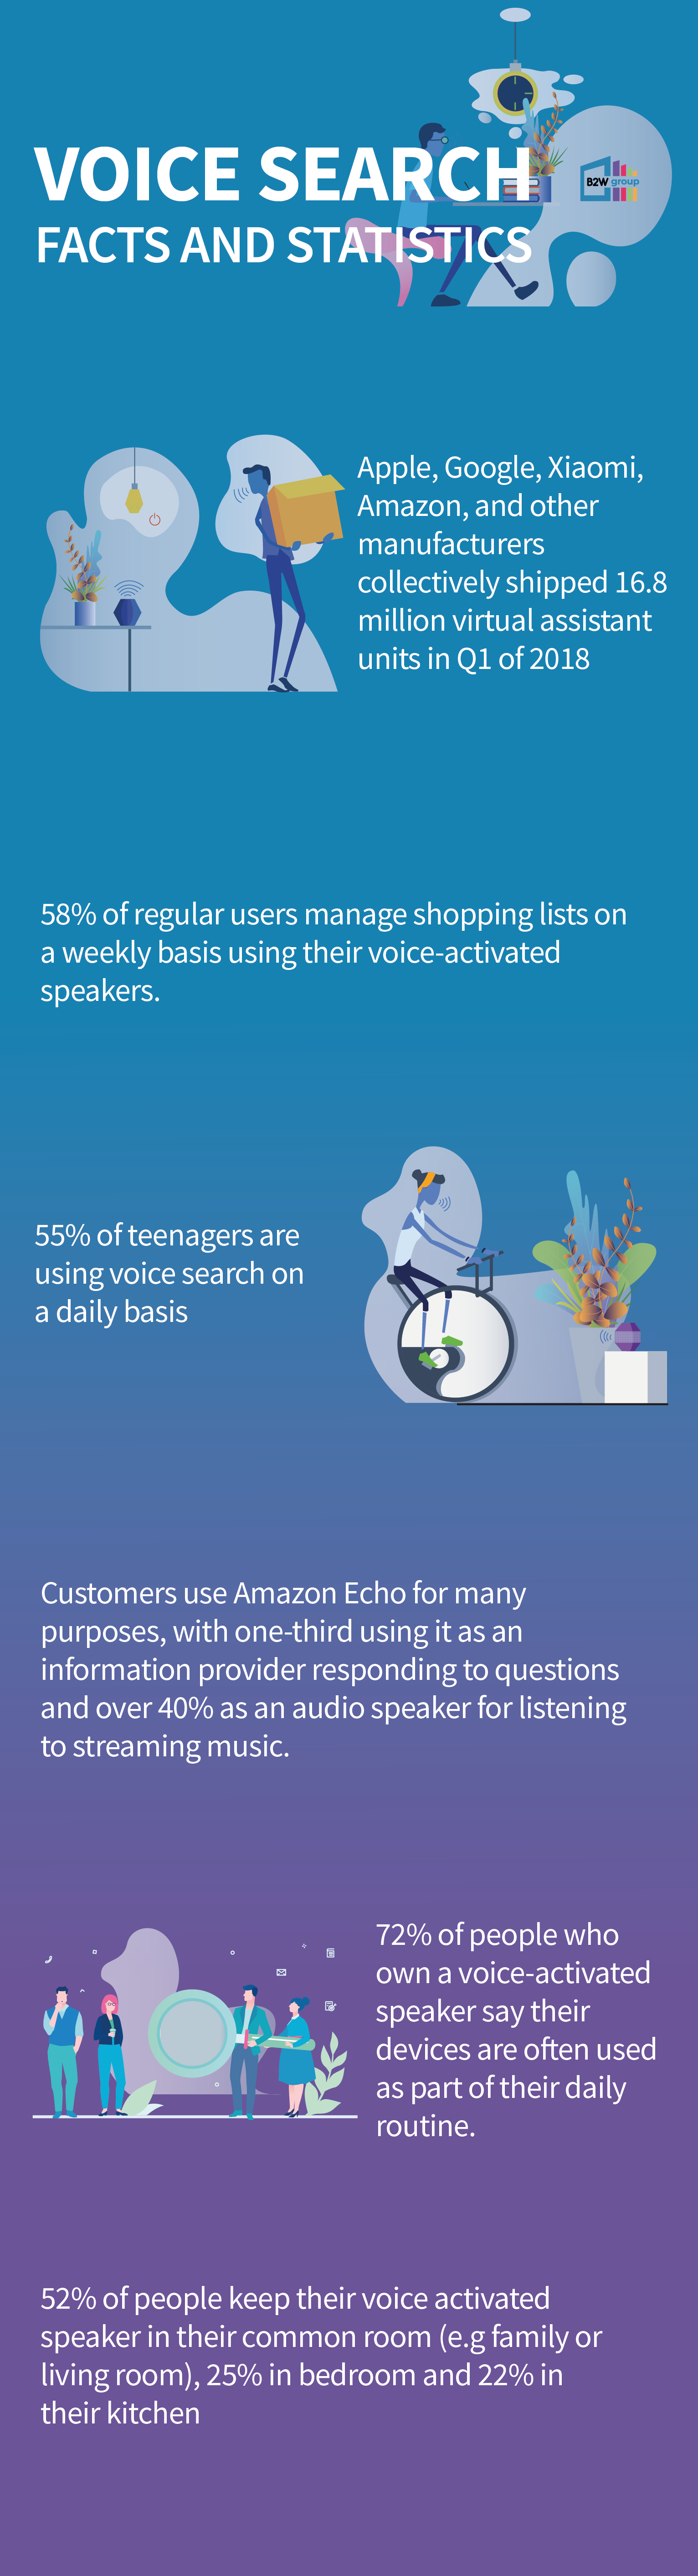 voice search virtual assistant statistics